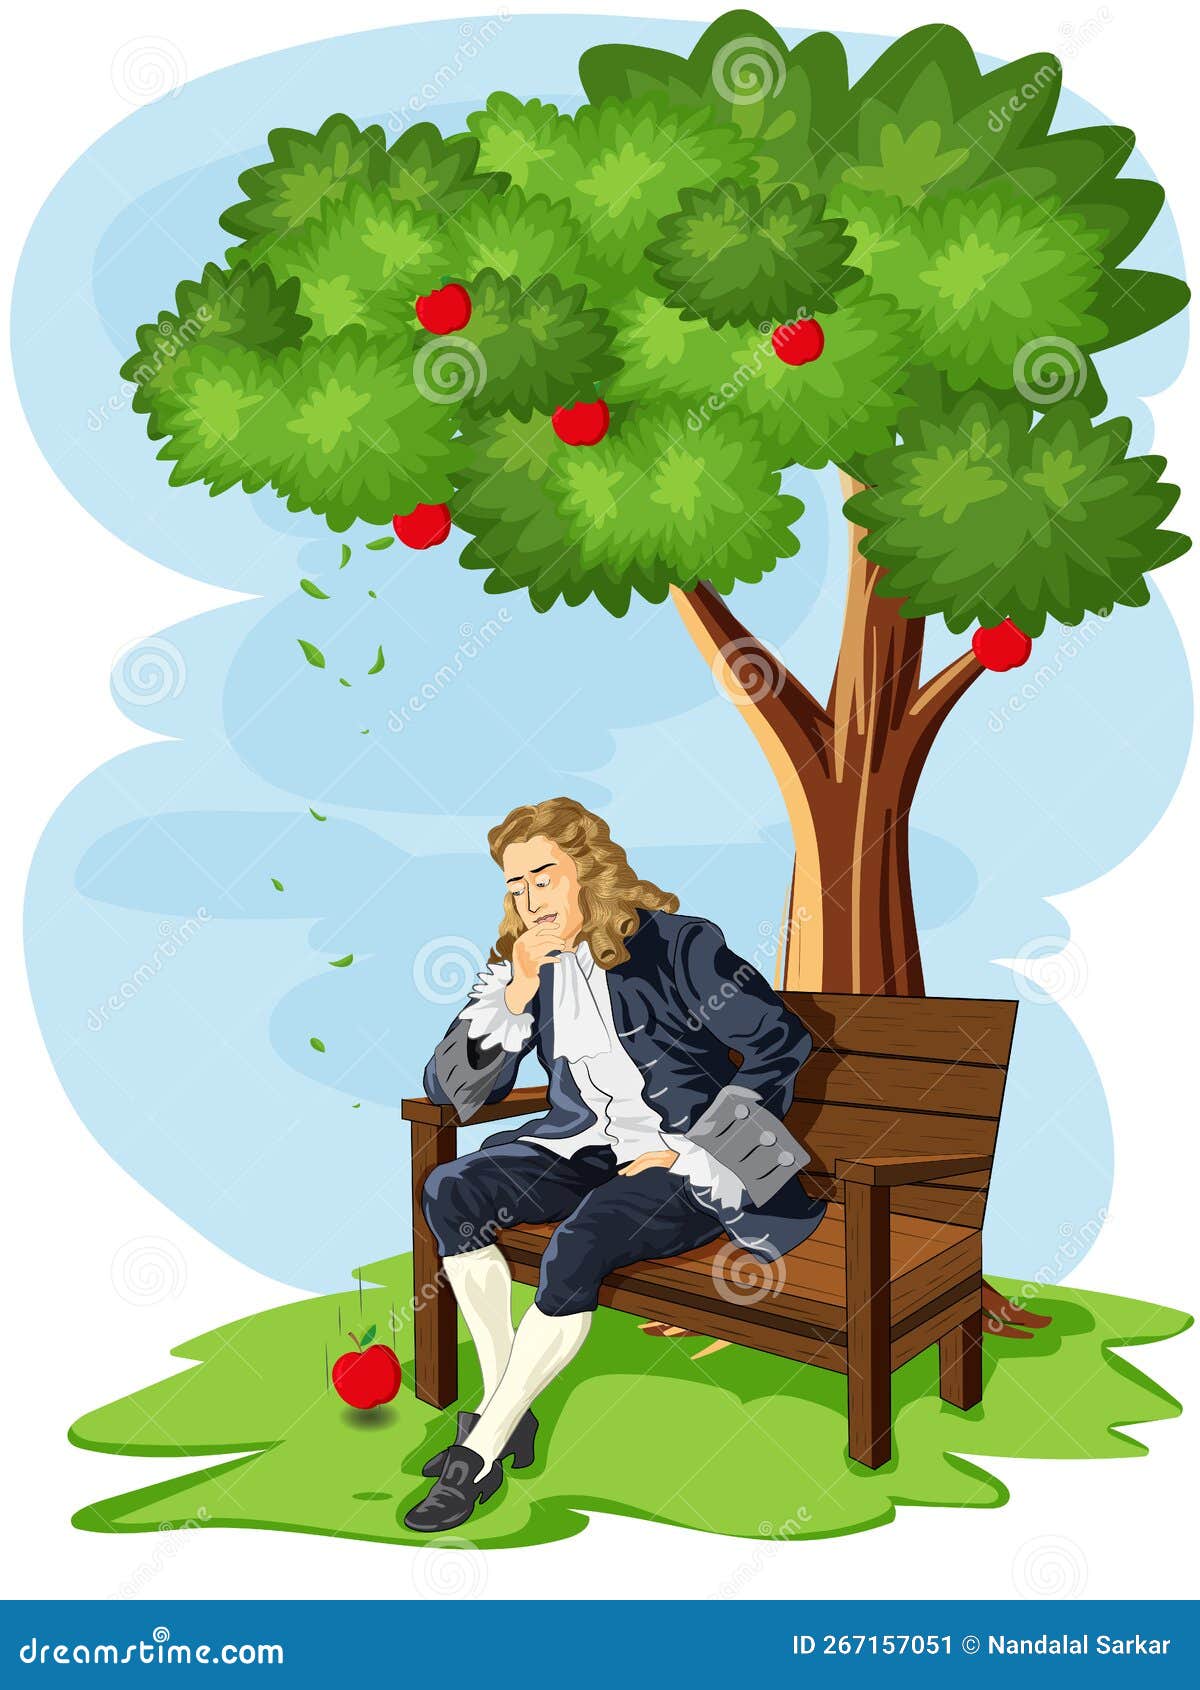 Isaac Newton: Who He Was, Why Apples Are Falling